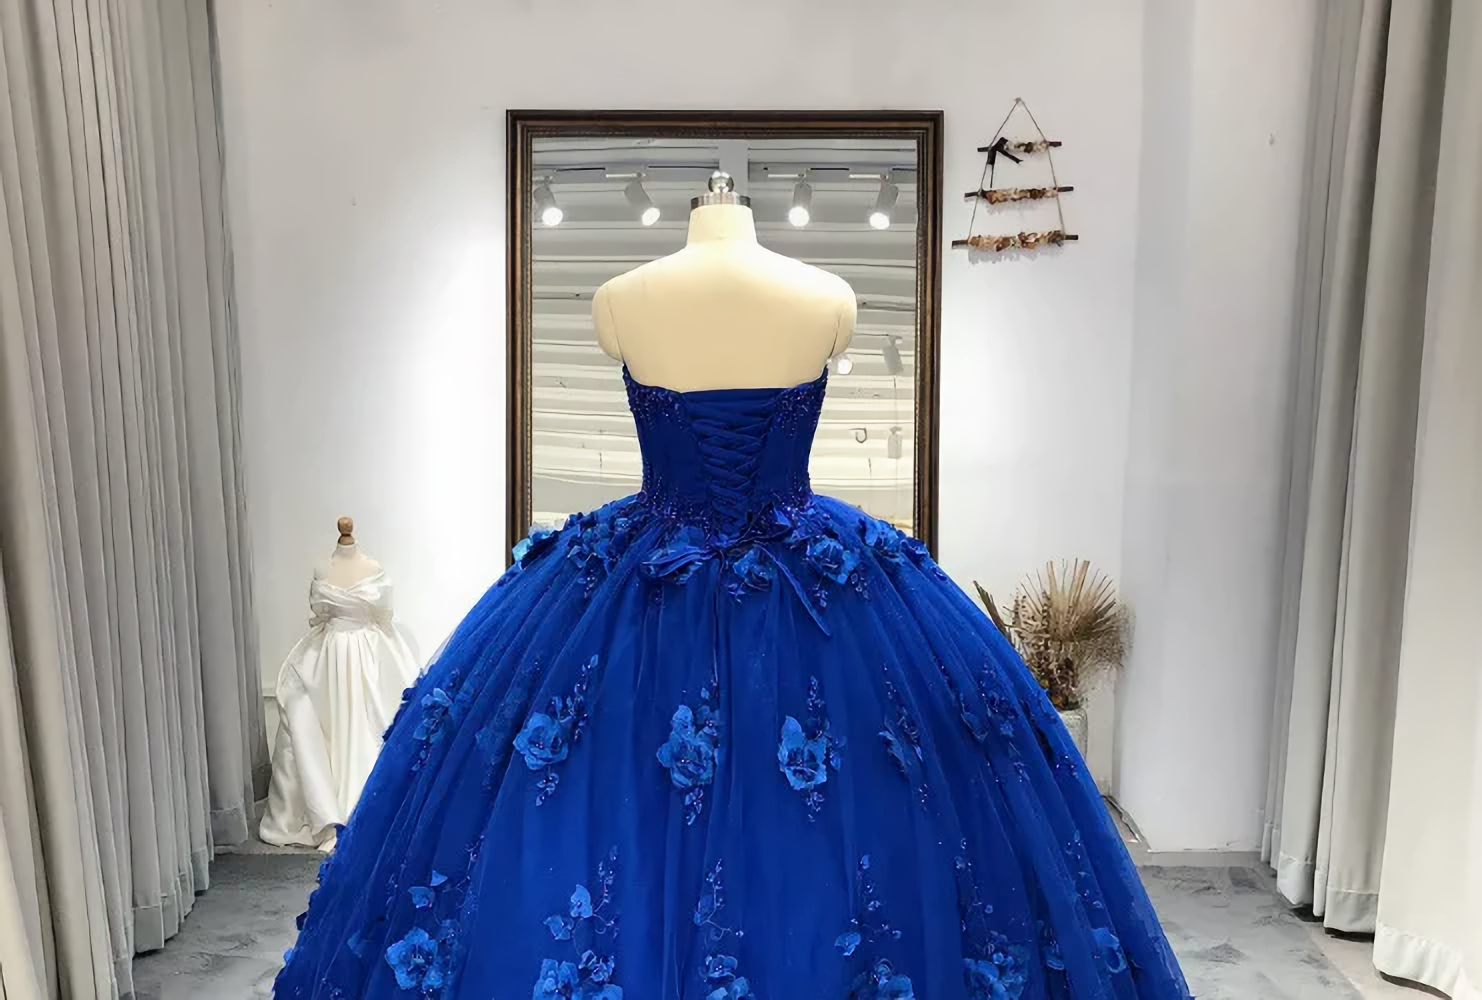 Prom Dress Chiffon, Royal Blue Quinceanera Dress Ball Gown With Appliques Flowers Princess Sweet 16 Dresses